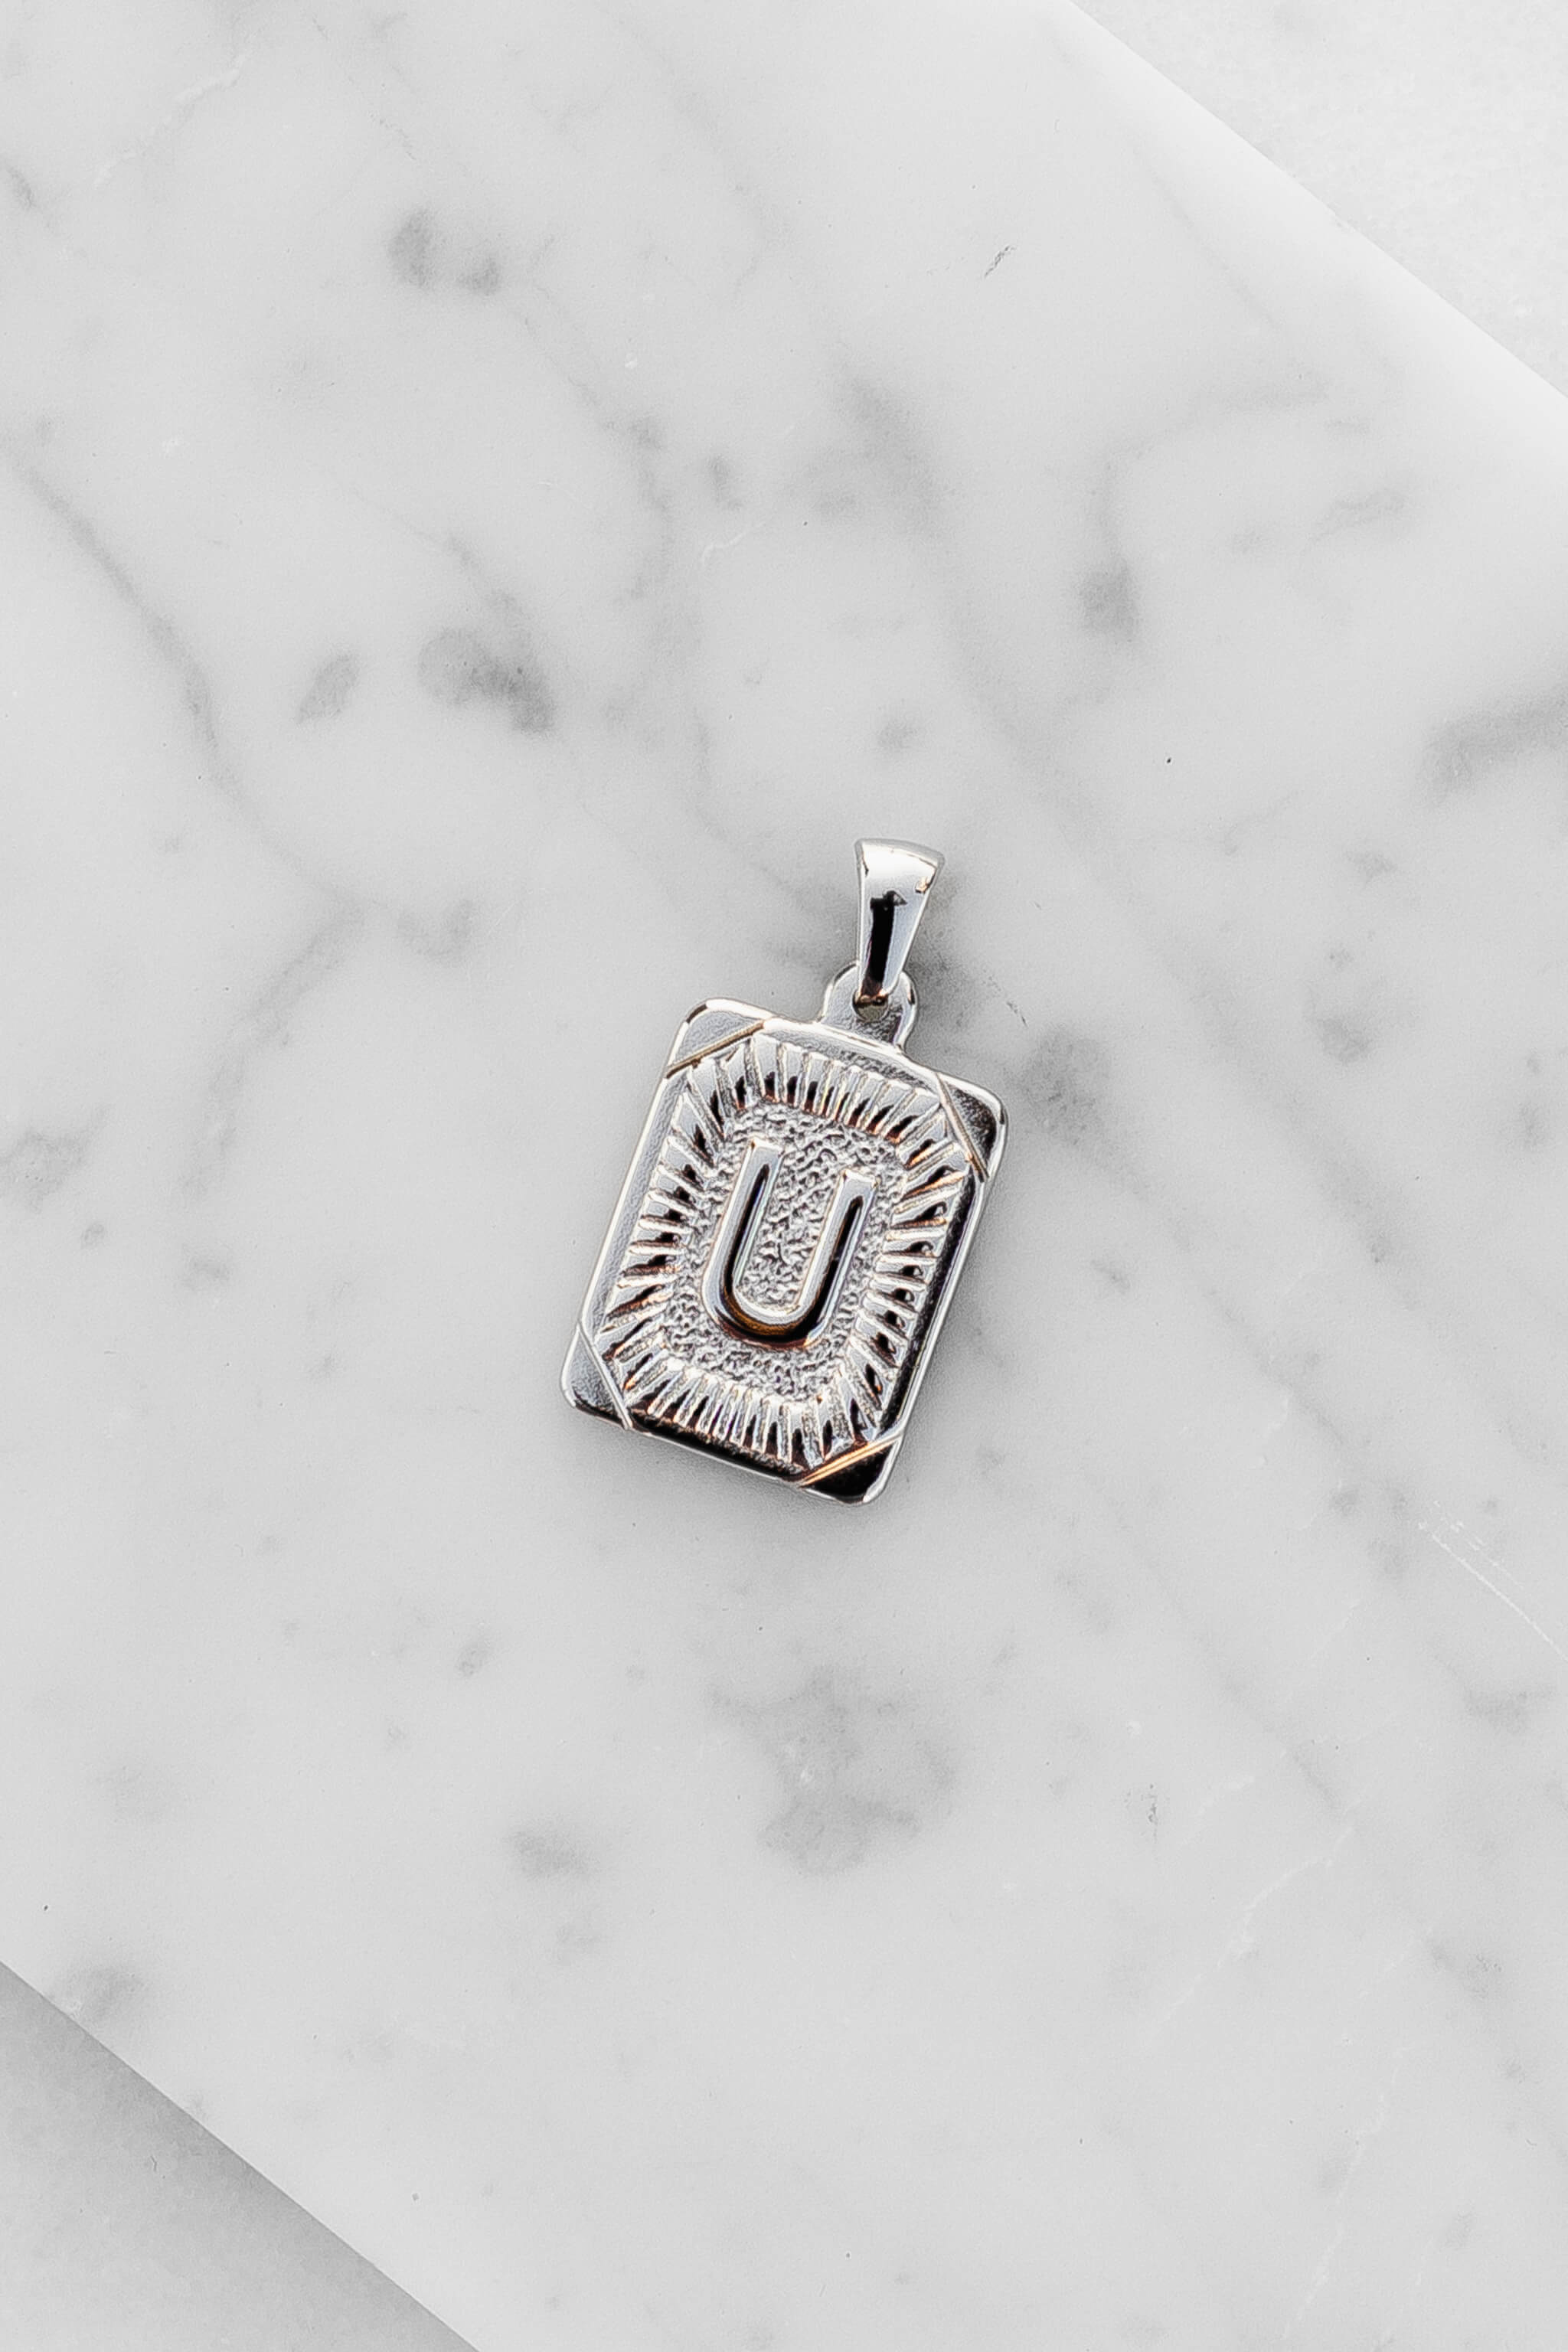 Silver Monogram Letter "U" Charm laying on a marble